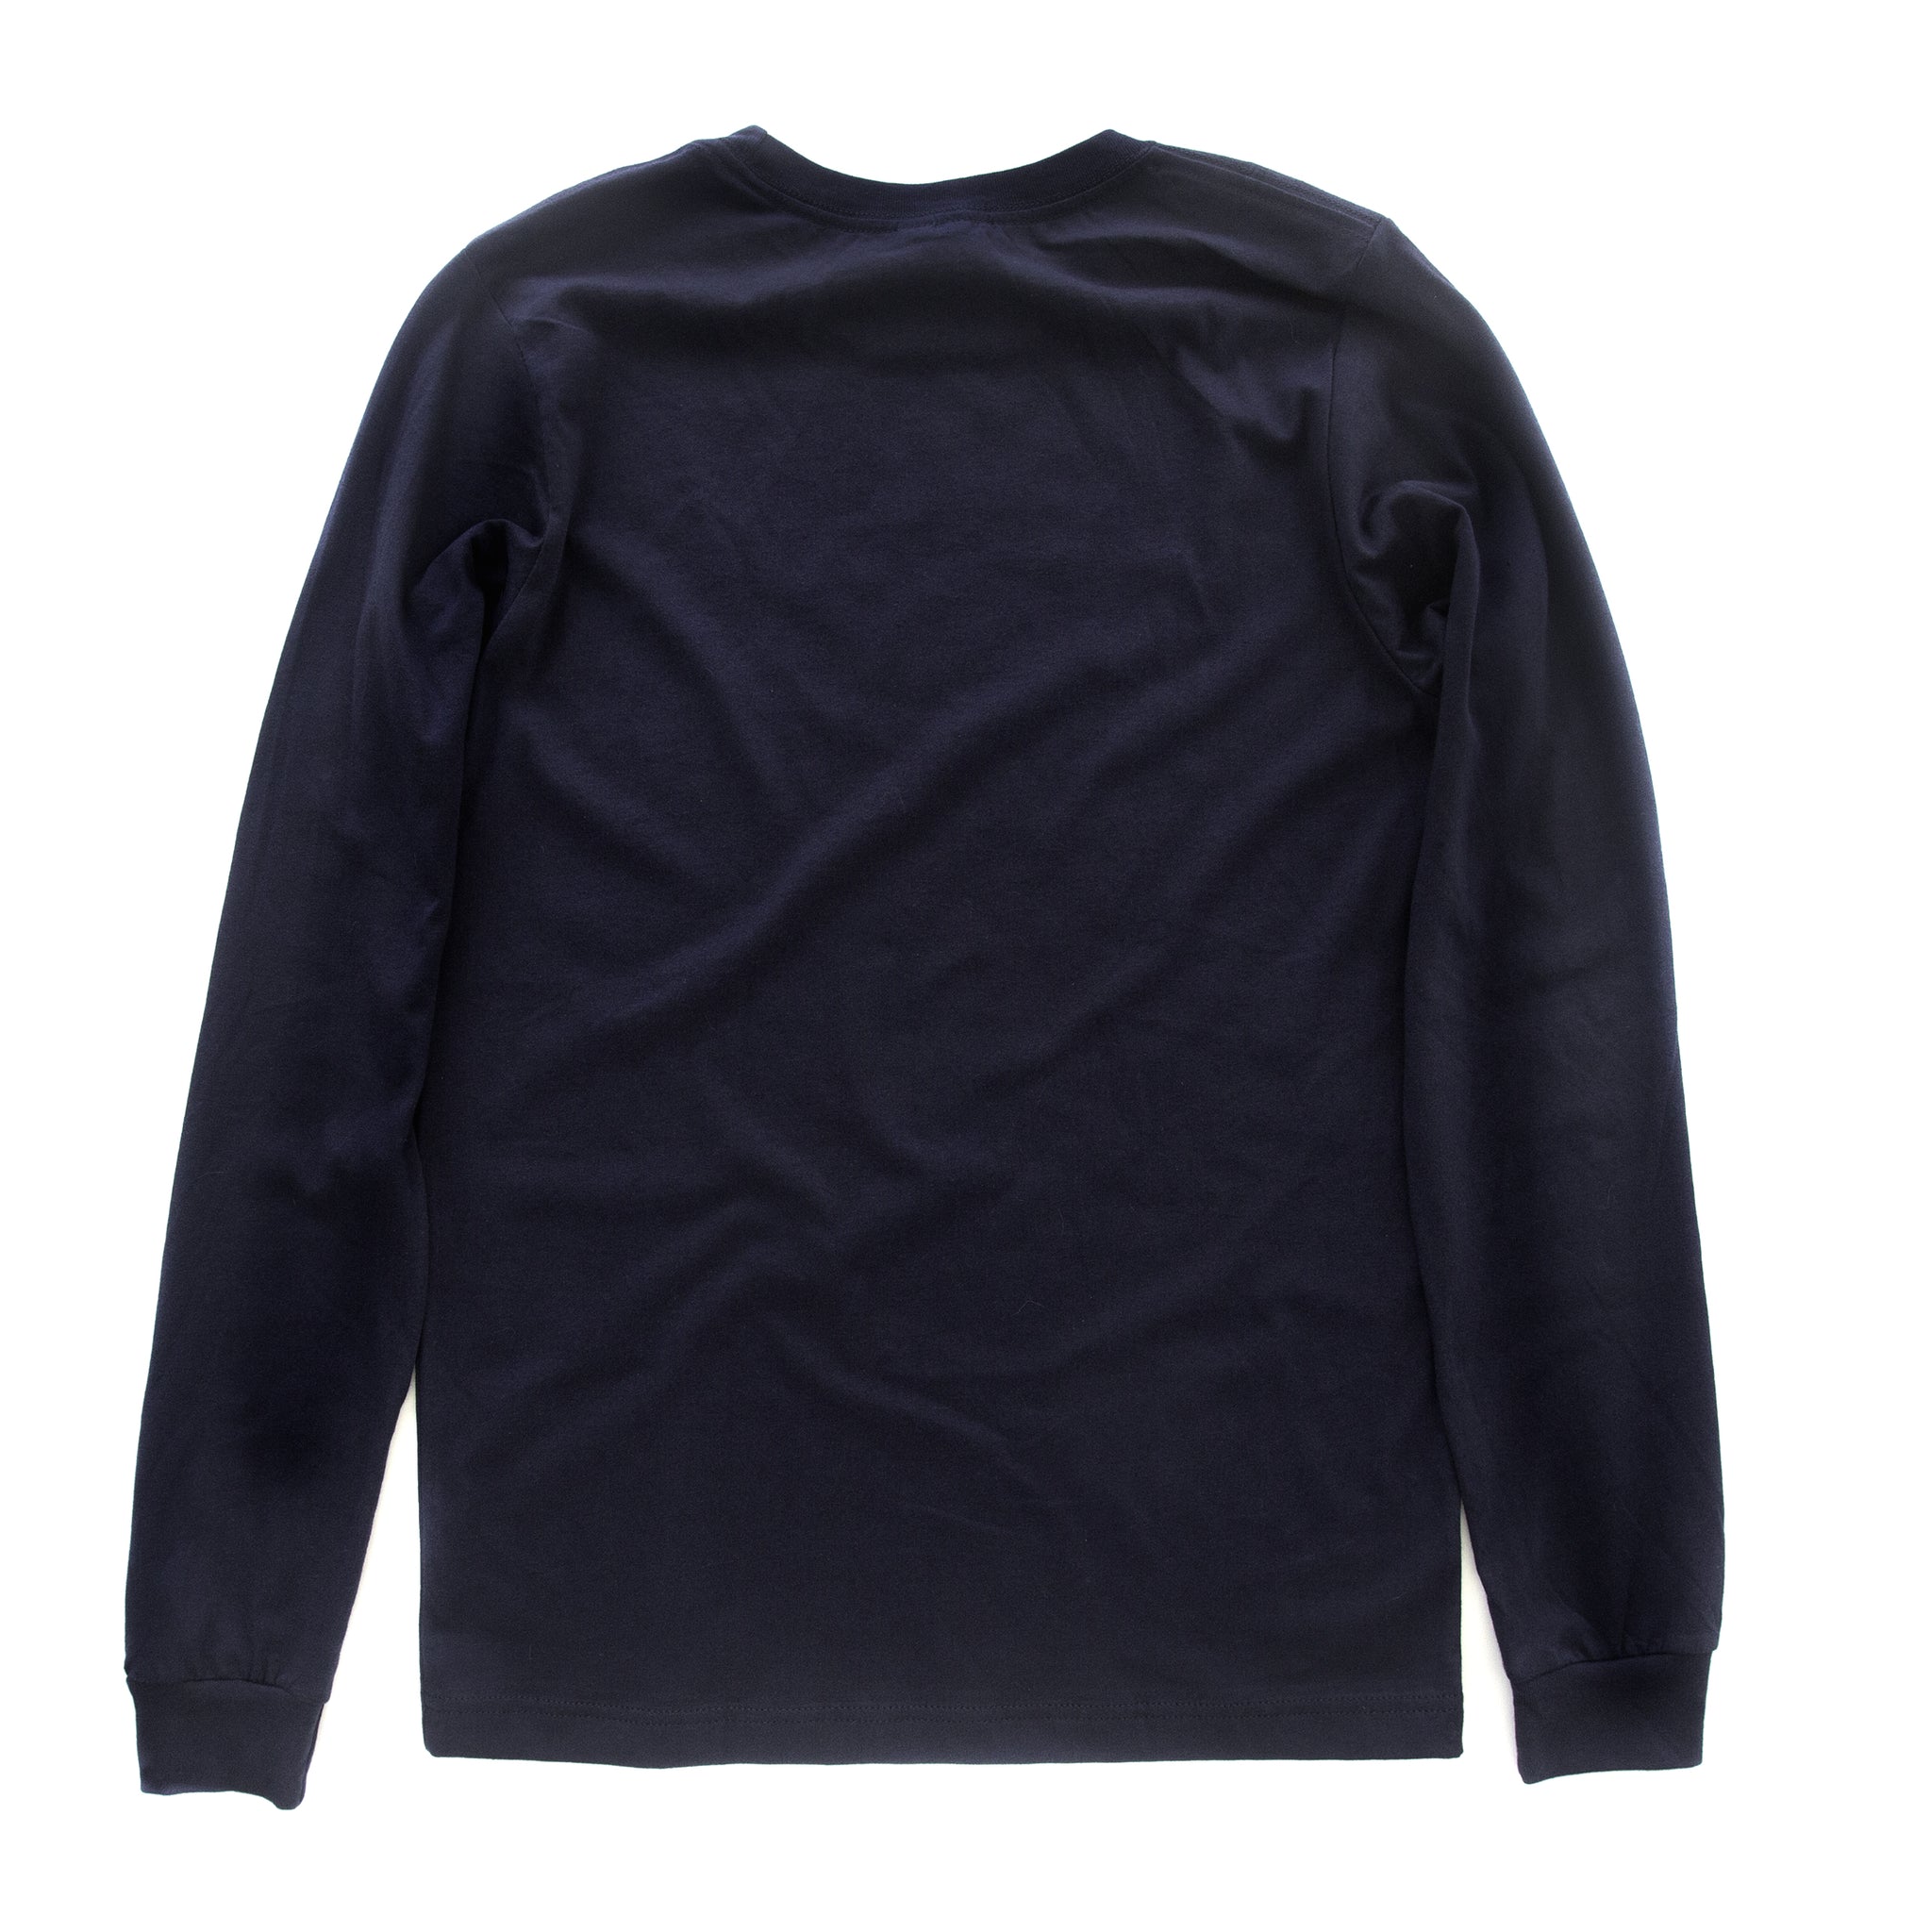 Back view of navy long-sleeved t-shirt